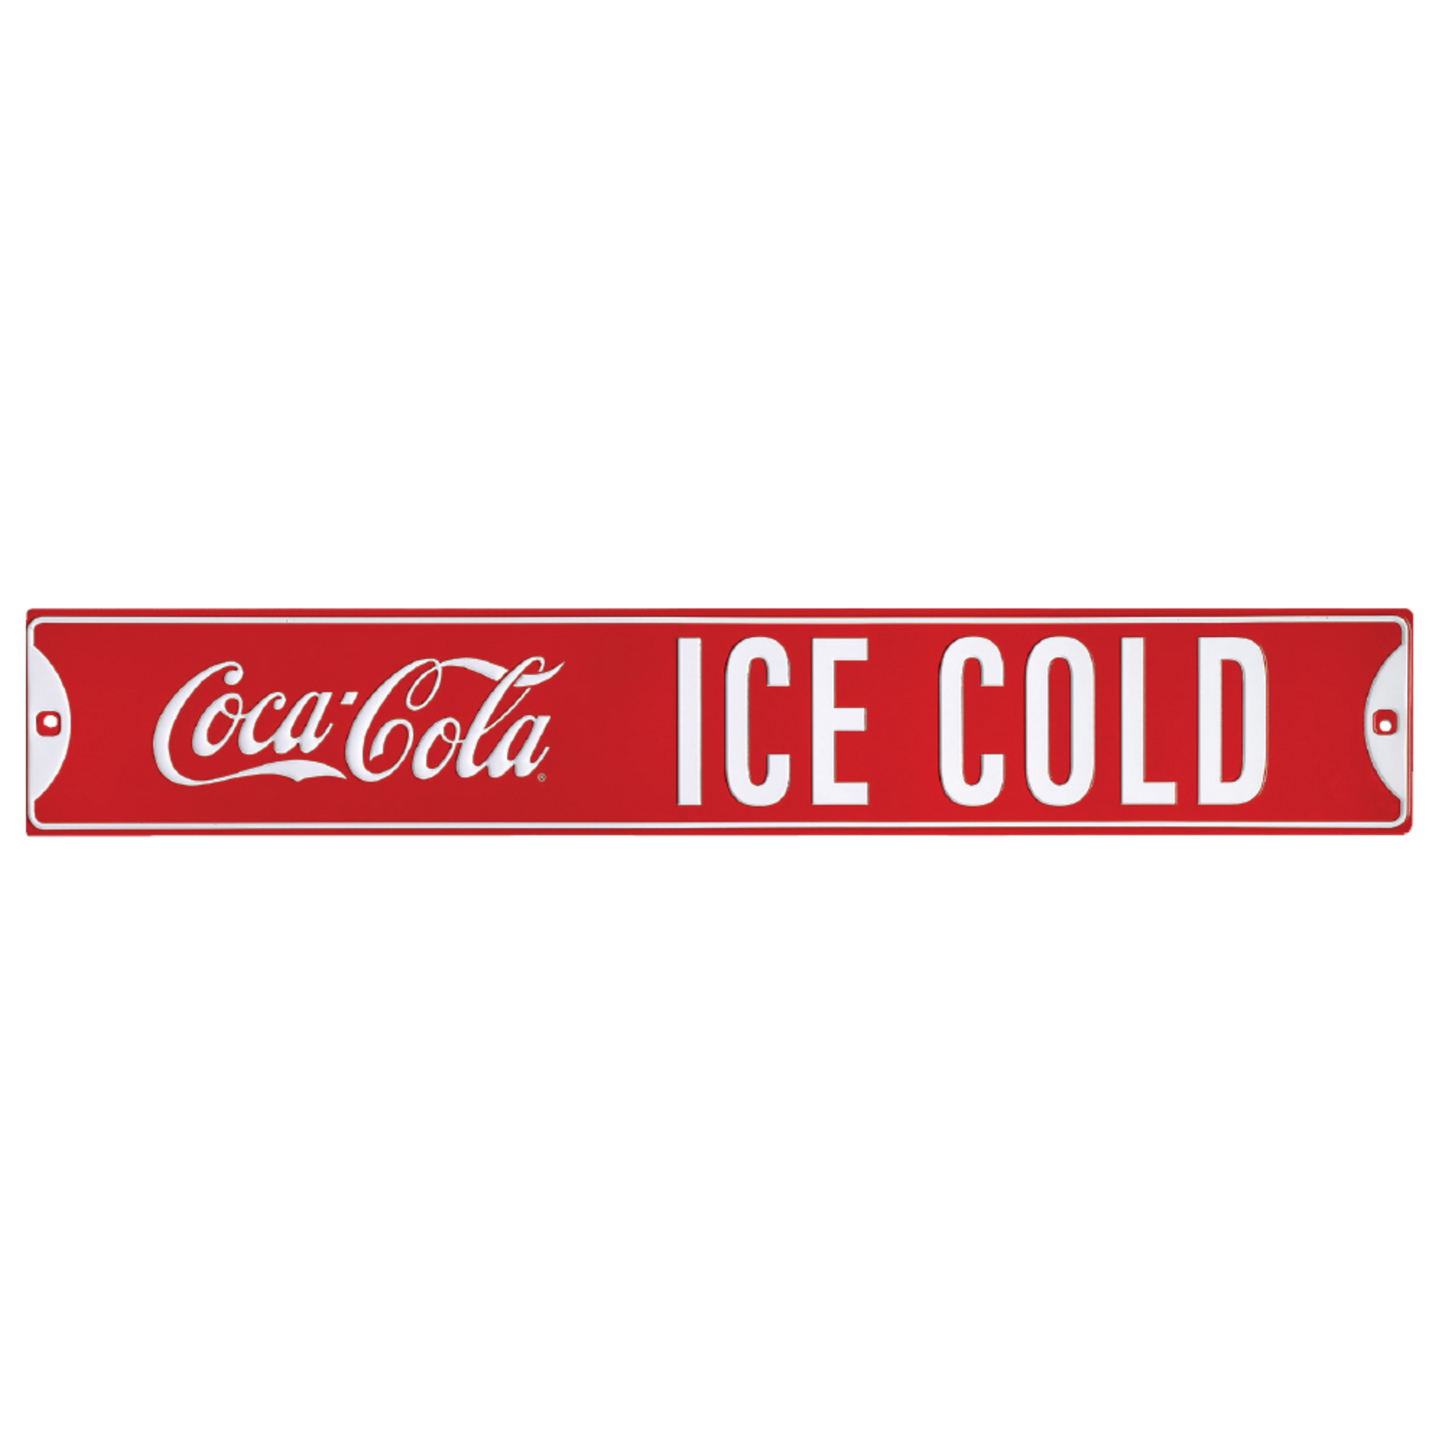 Vintage-inspired red Coca-Cola 'ICE COLD' street-style tin sign.